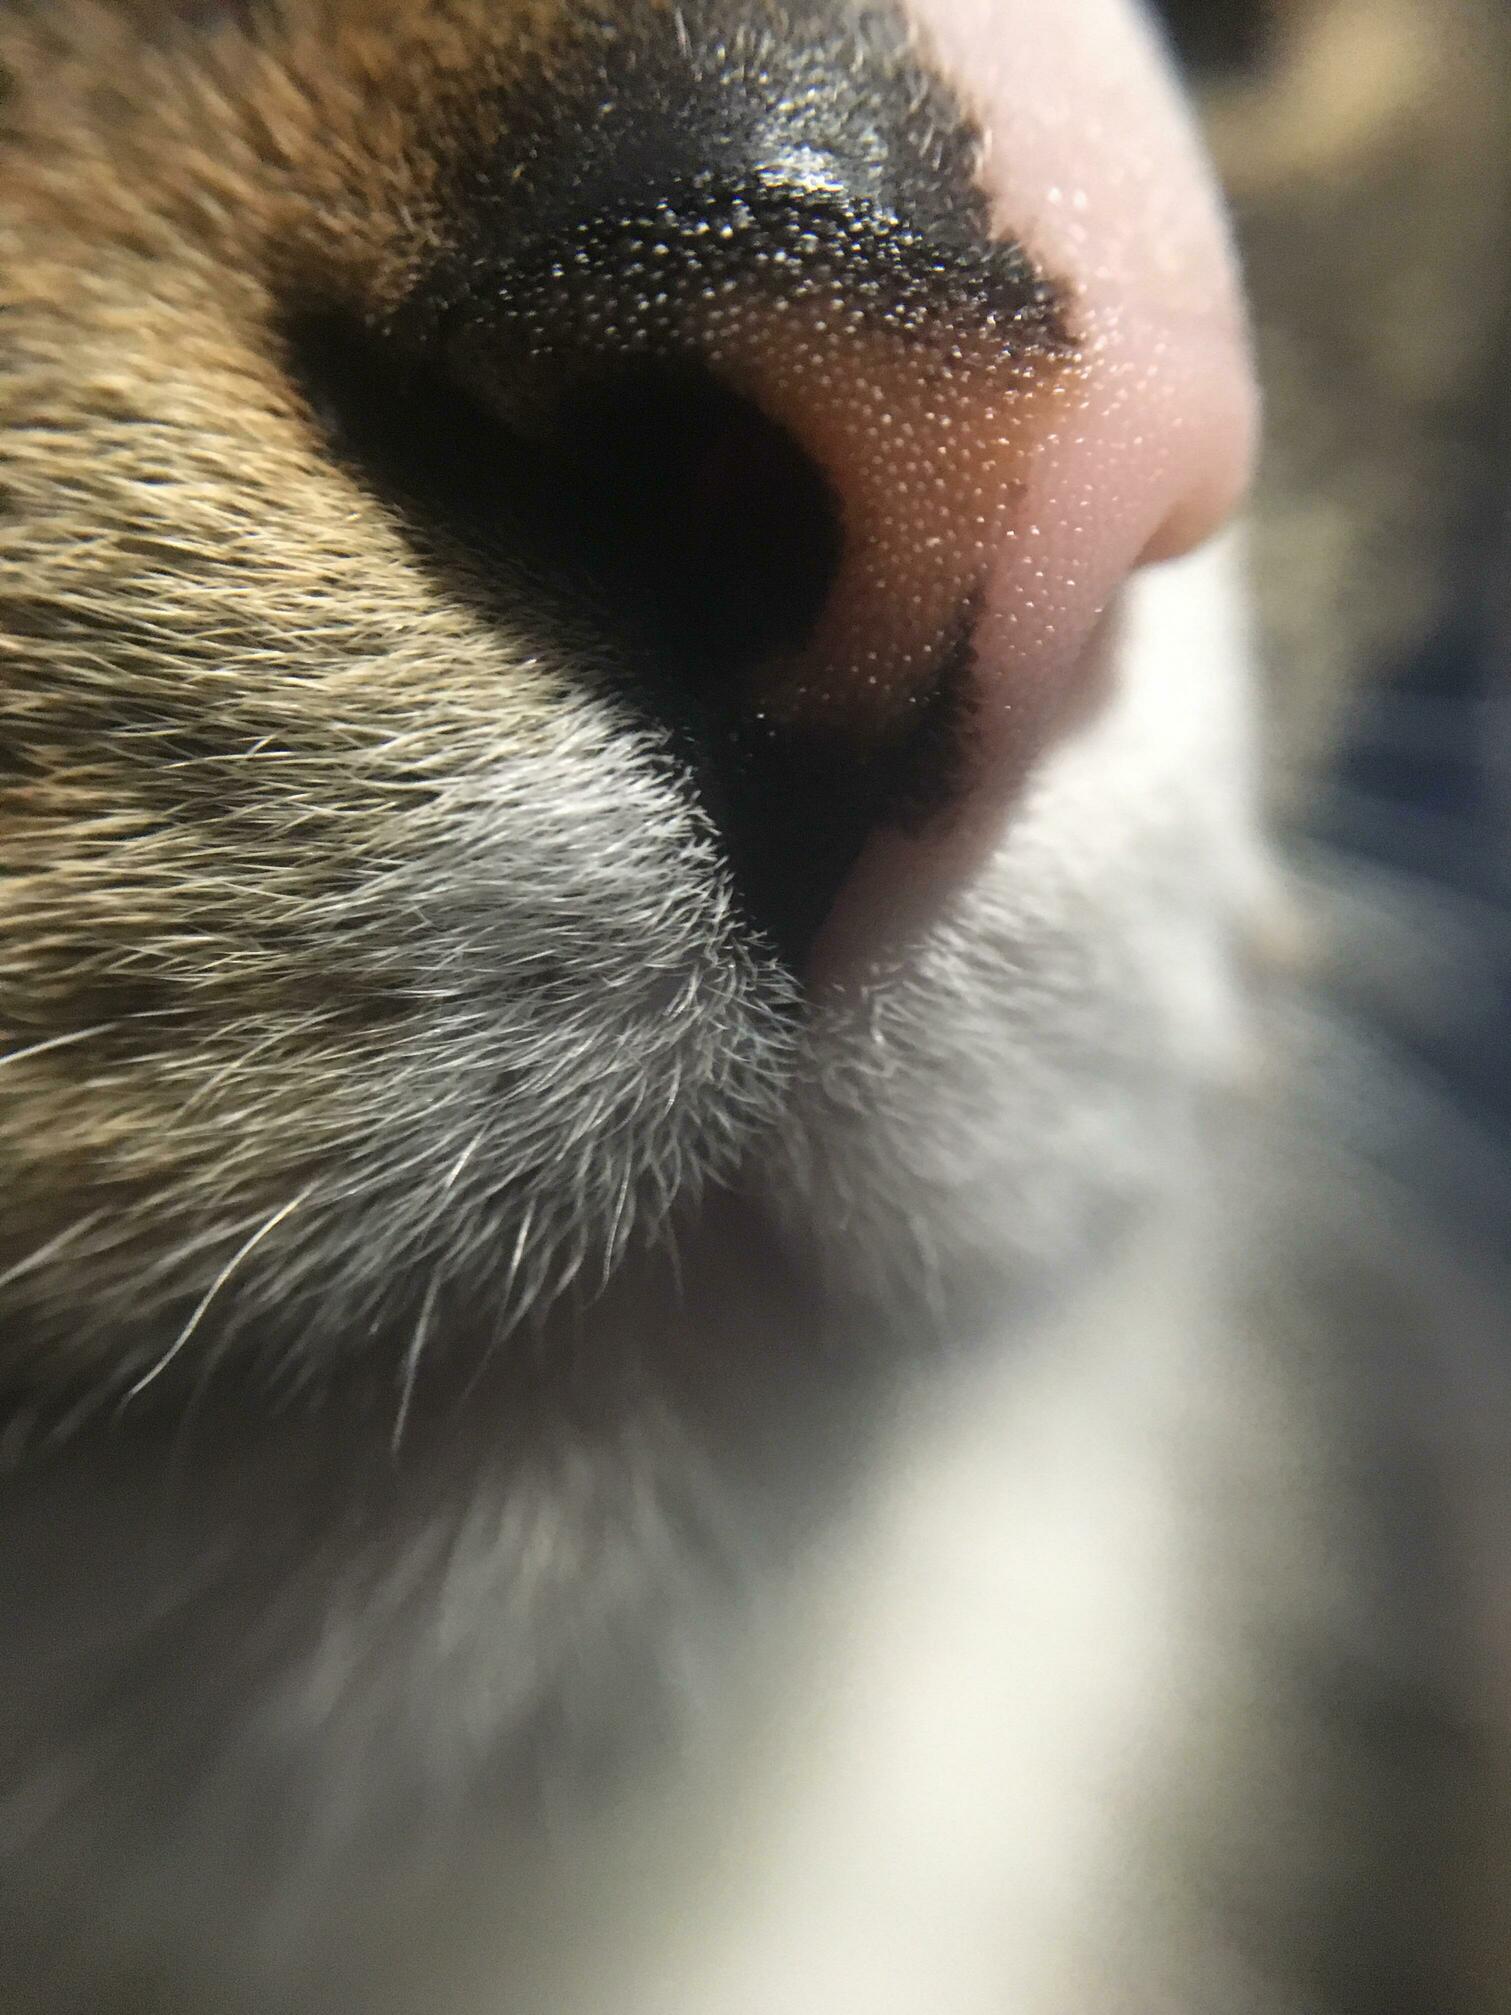 How do you all feel about noses